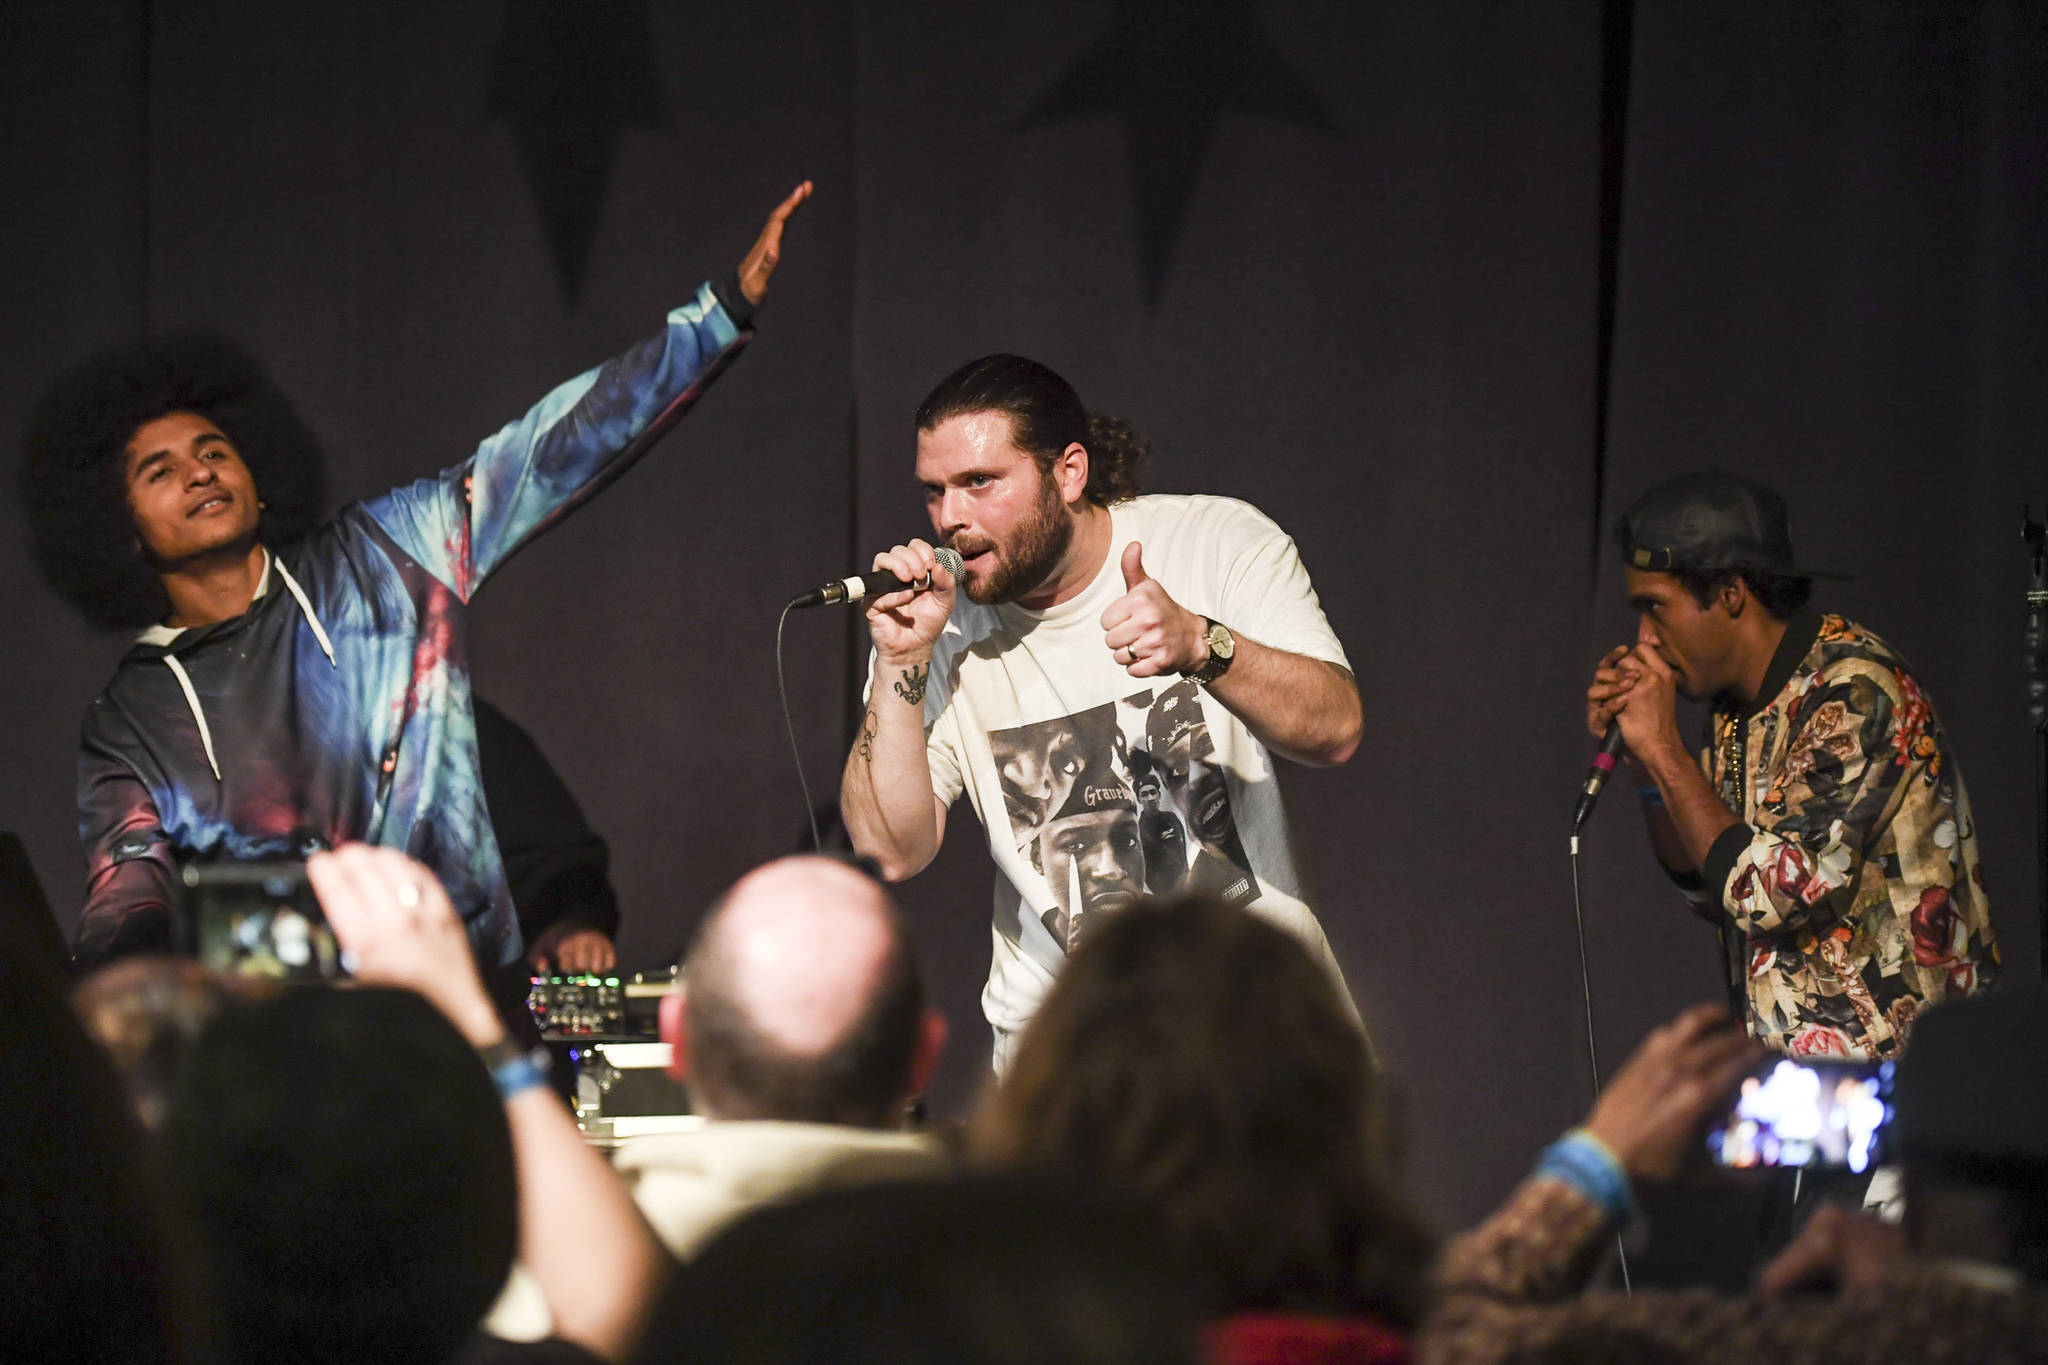 T.J. “Manner” Cramer, center, performs with Arias Hoyle, left, and Chris Talley during the Killah Priest of Wu Tang Southeast Tour at the Juneau Arts & Culture Center on Friday, Dec. 20, 2019. (Michael Penn | Juneau Empire)